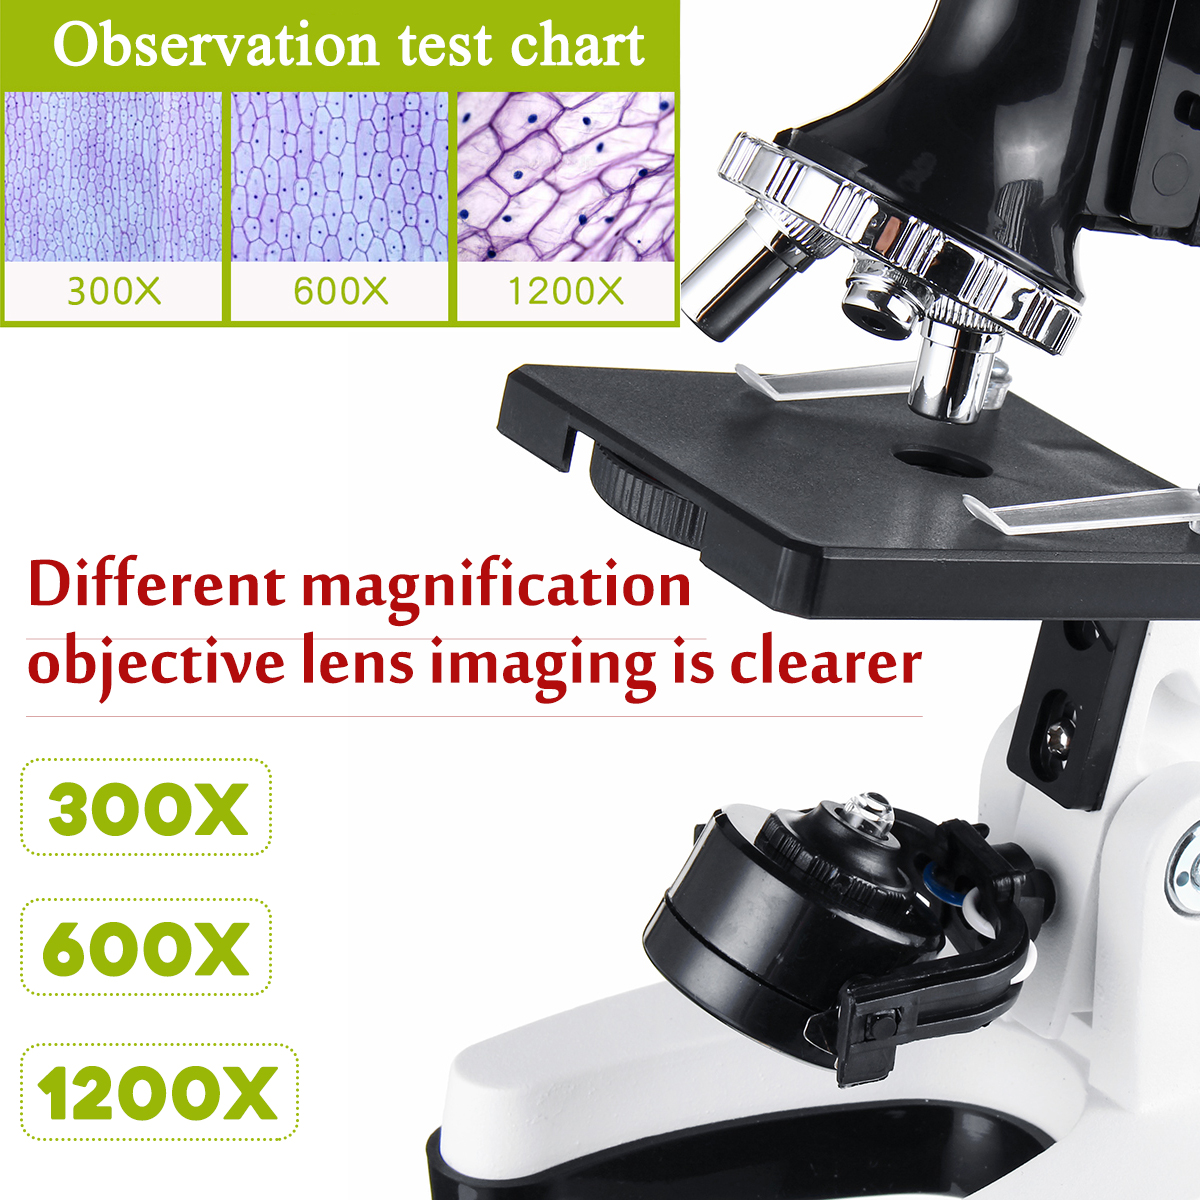 LED-Science-Microscope-Kit-for-Children-1200x-1200-Scientific-Instruments-Toy-Set-for-Early-Educatio-1497774-1